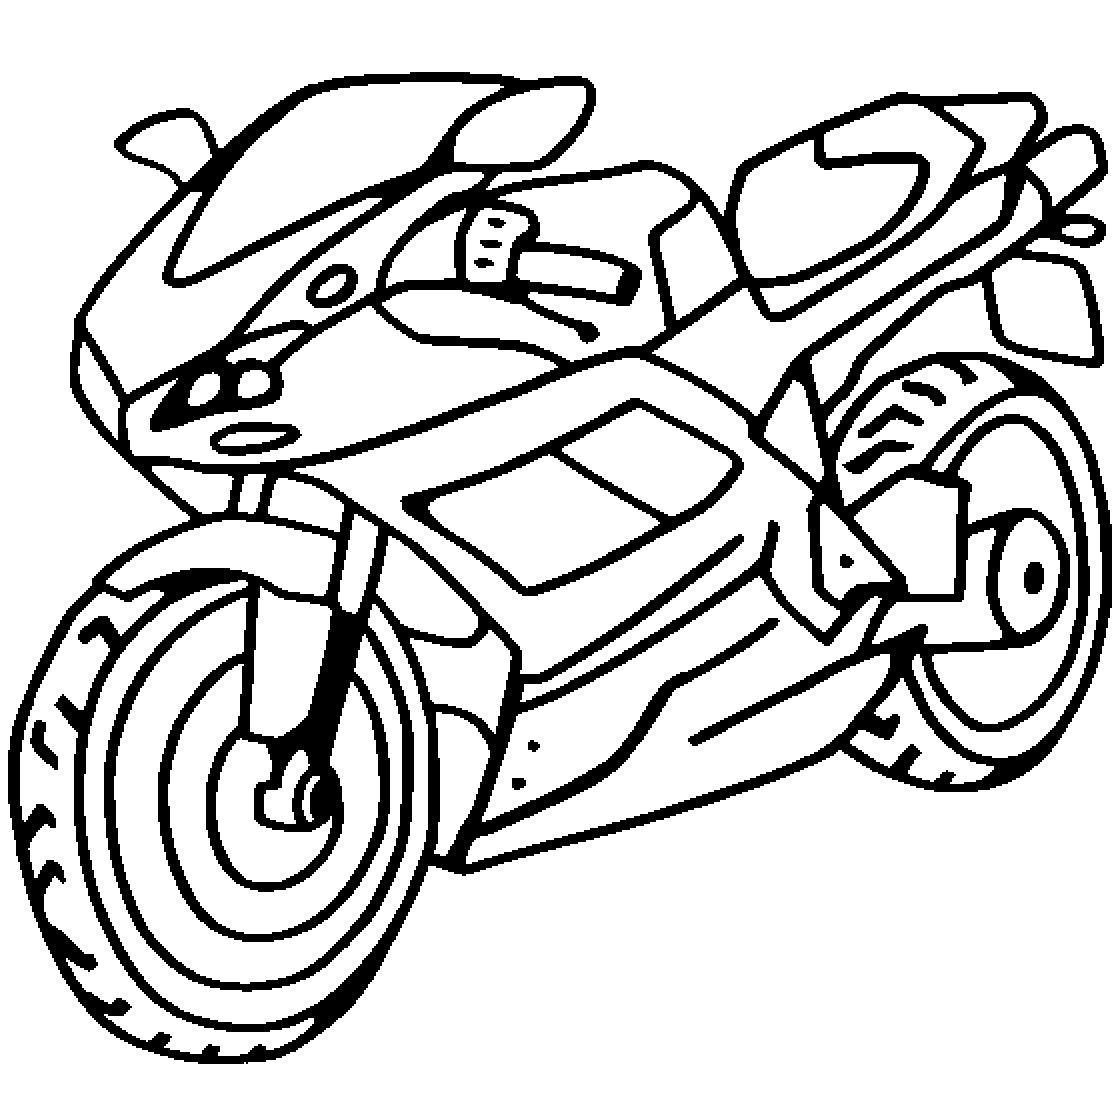 Motorcycle coloring pages cool motorcycle coloring pages for kids coloringstar